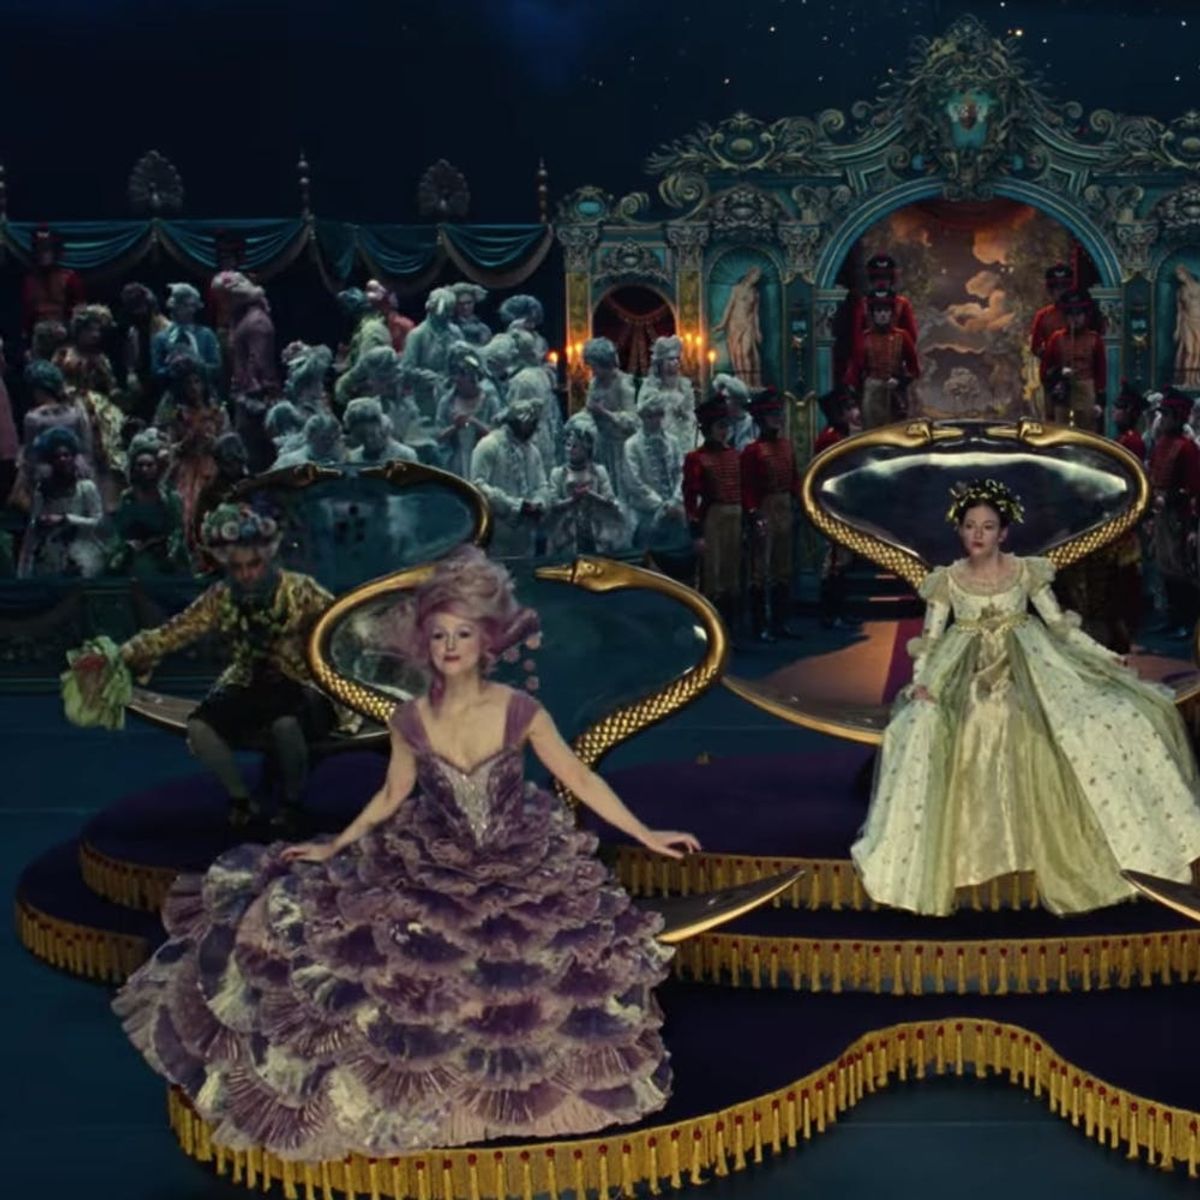 The First Teaser Trailer for ‘The Nutcracker and the Four Realms’ Takes You on a Magical Journey